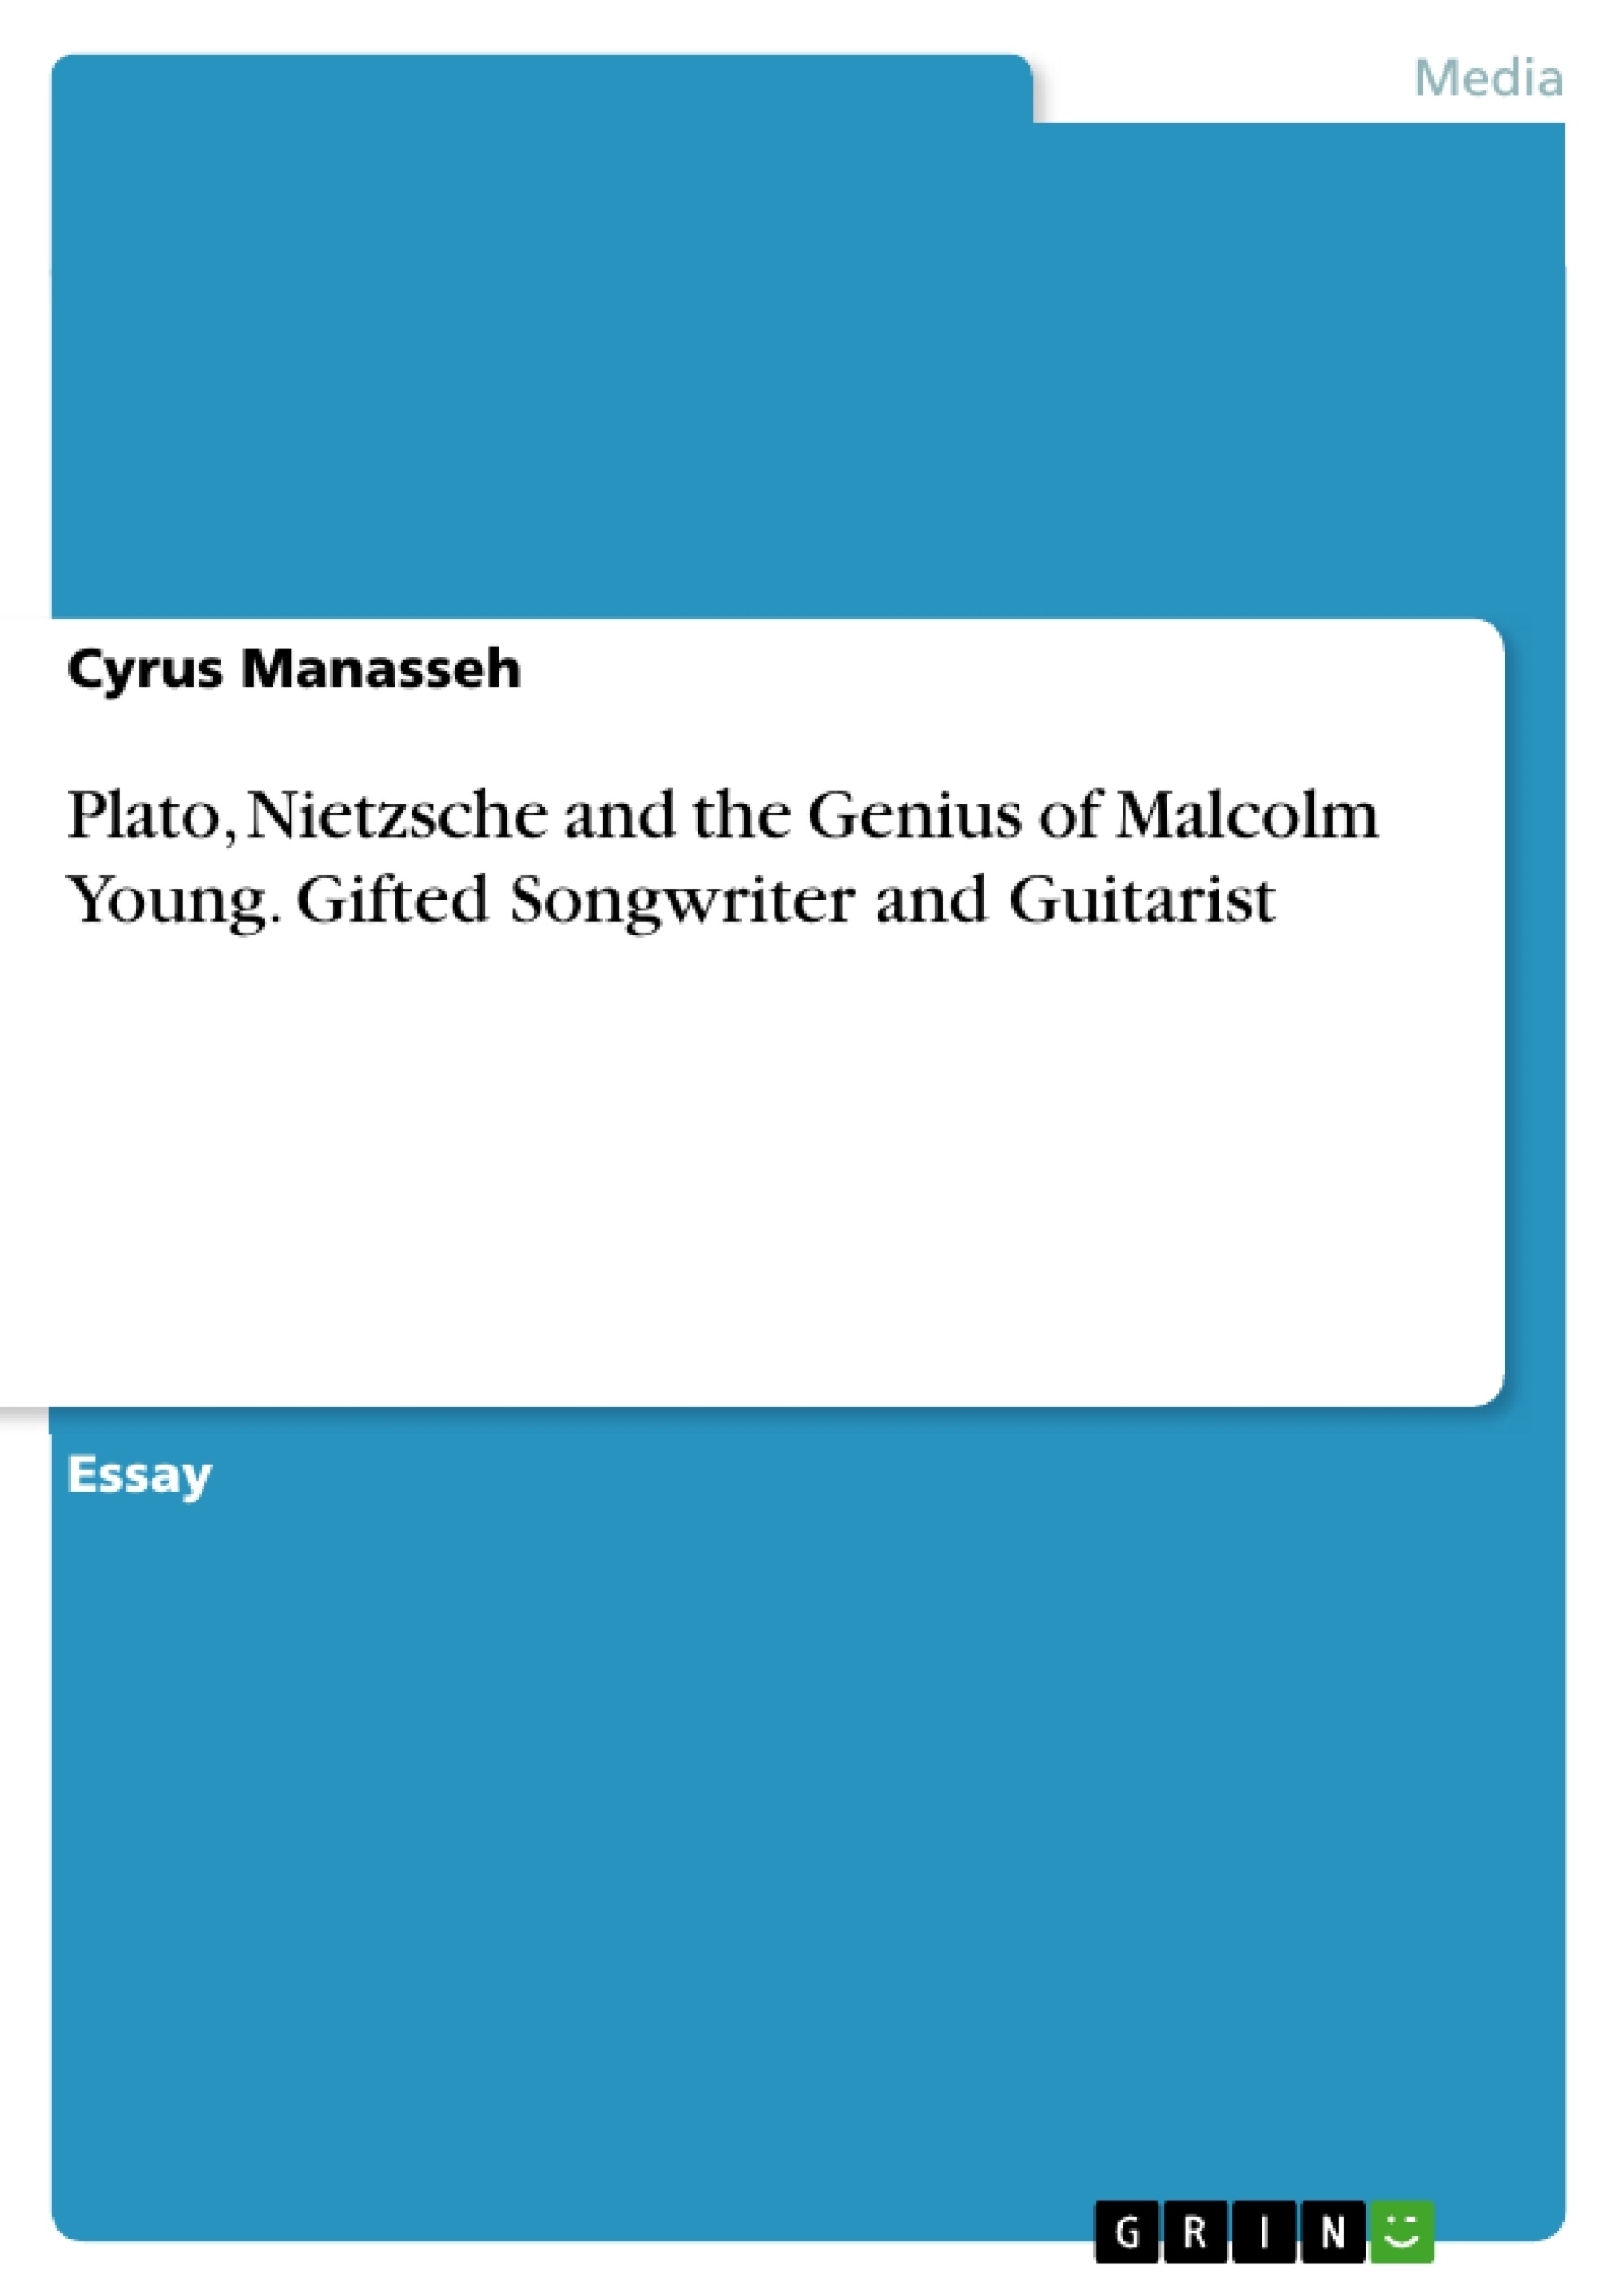 Title: Plato, Nietzsche and the Genius of Malcolm Young. Gifted Songwriter and Guitarist